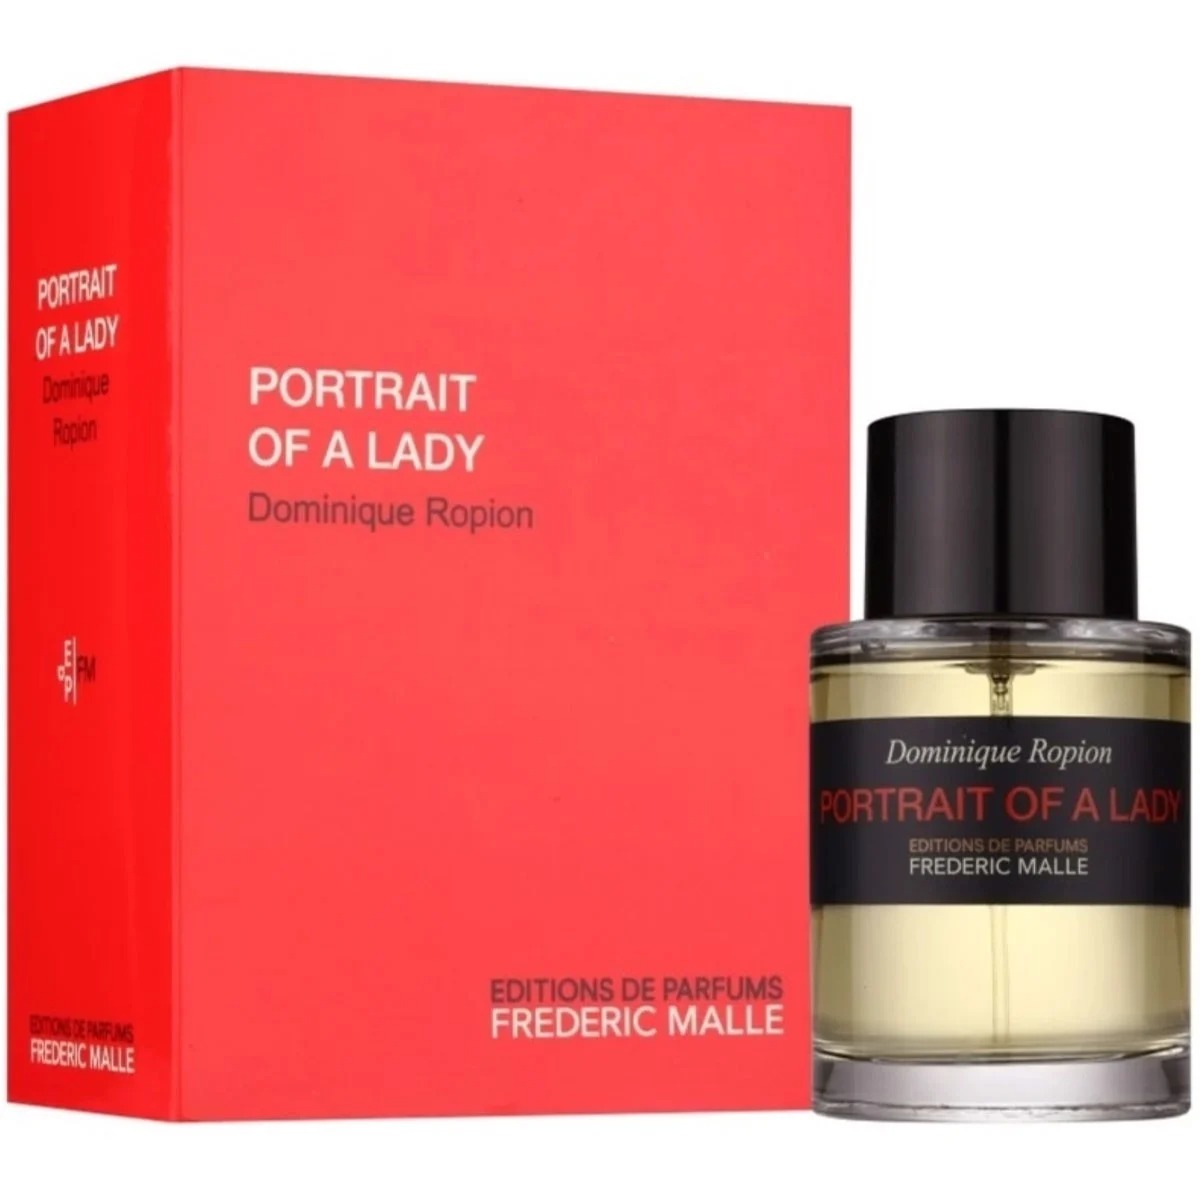 Frederic Malle Portrait of a Lady 1